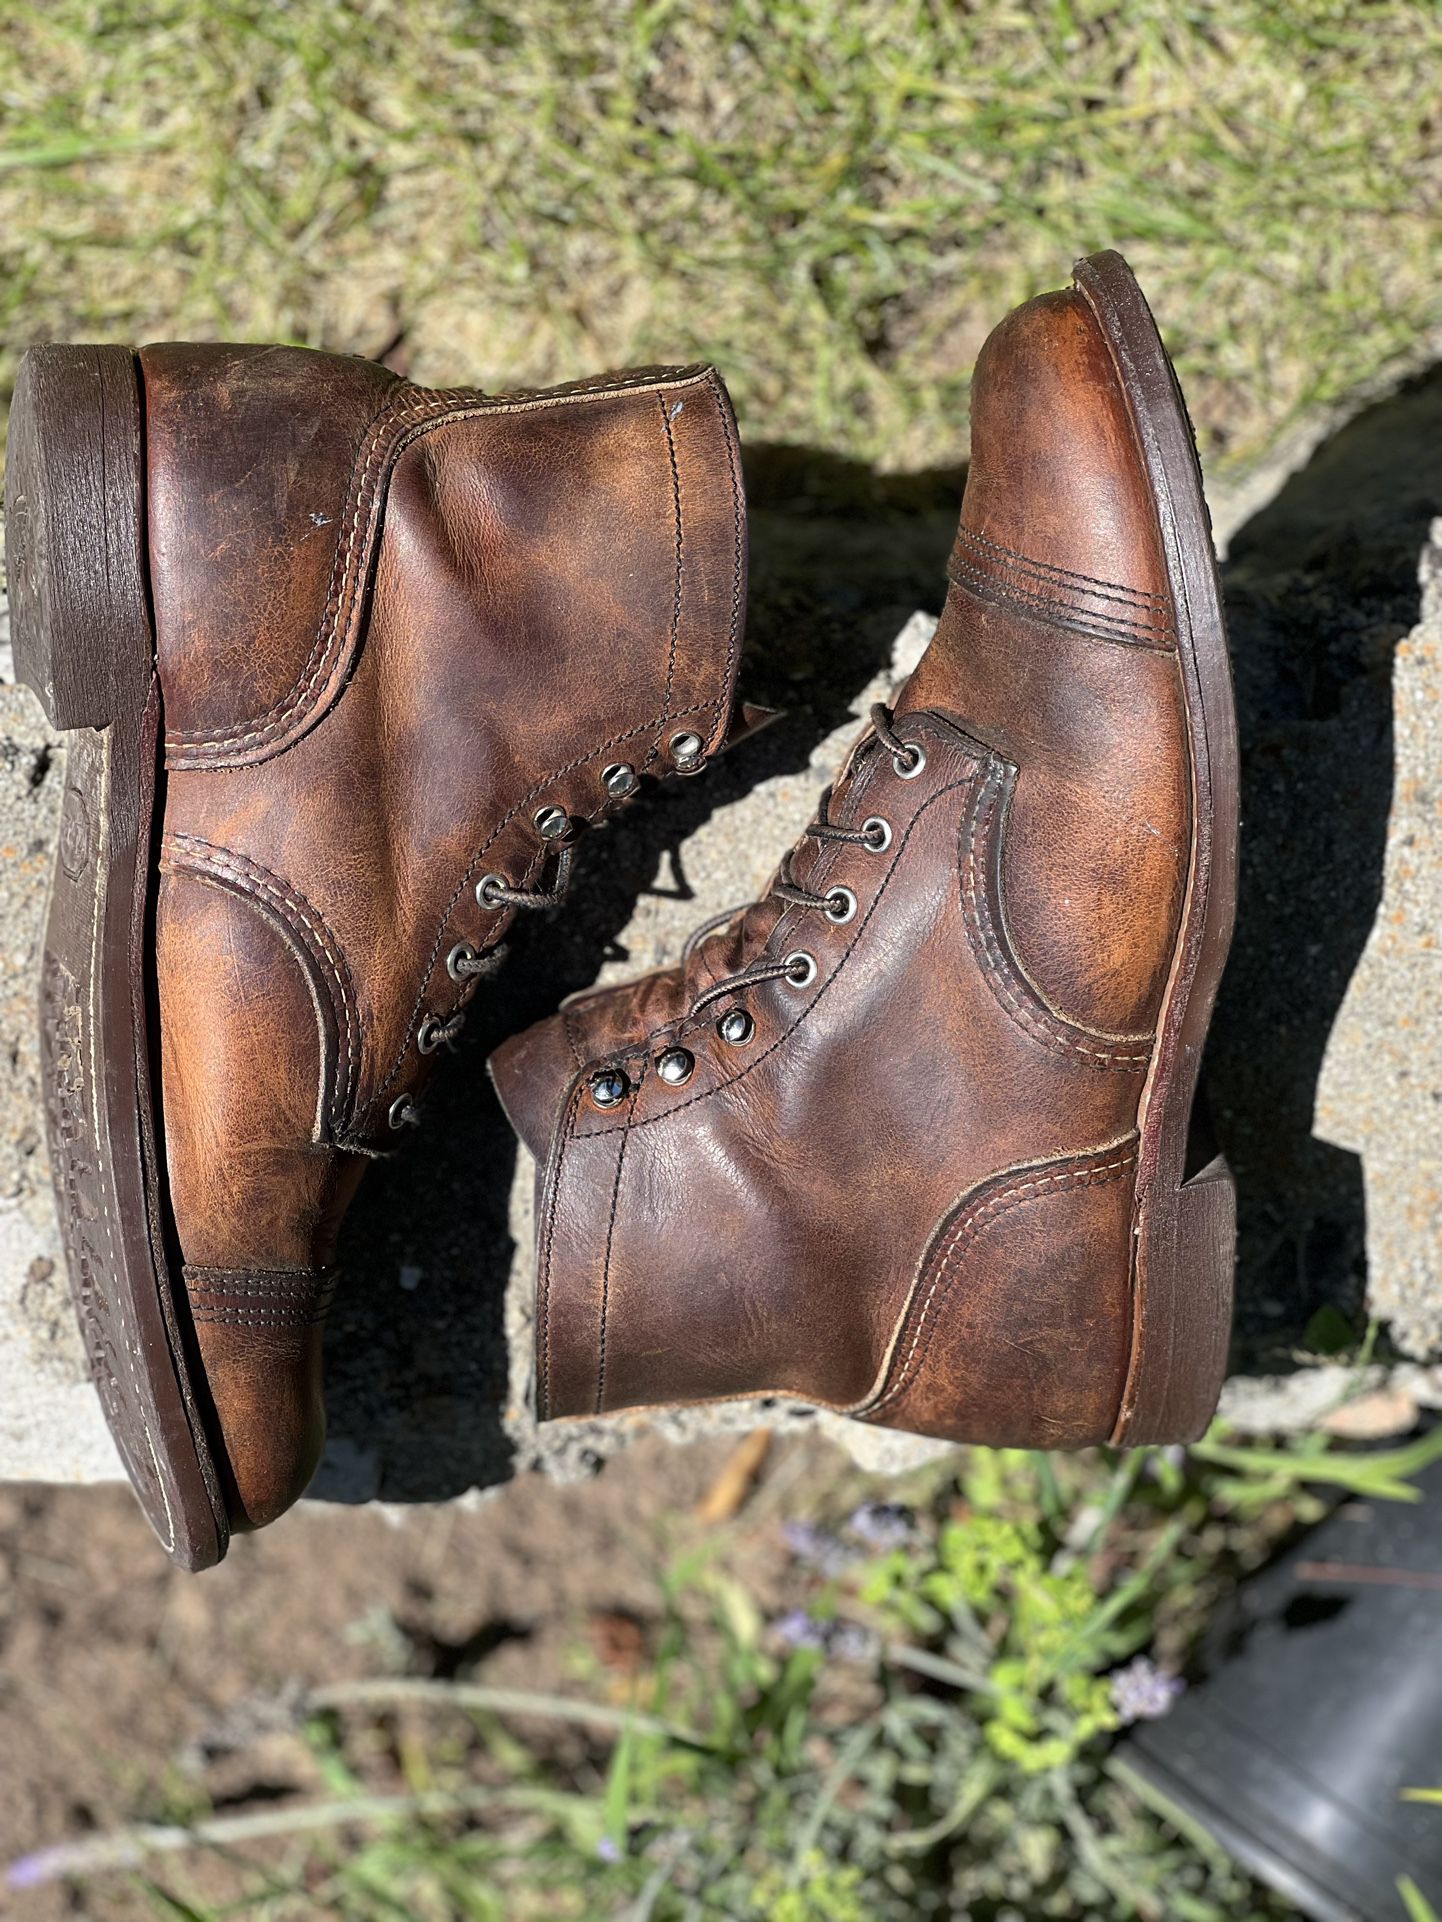 Patina Red Wing Boots - Size 9 EE - Iron Rangers 8085